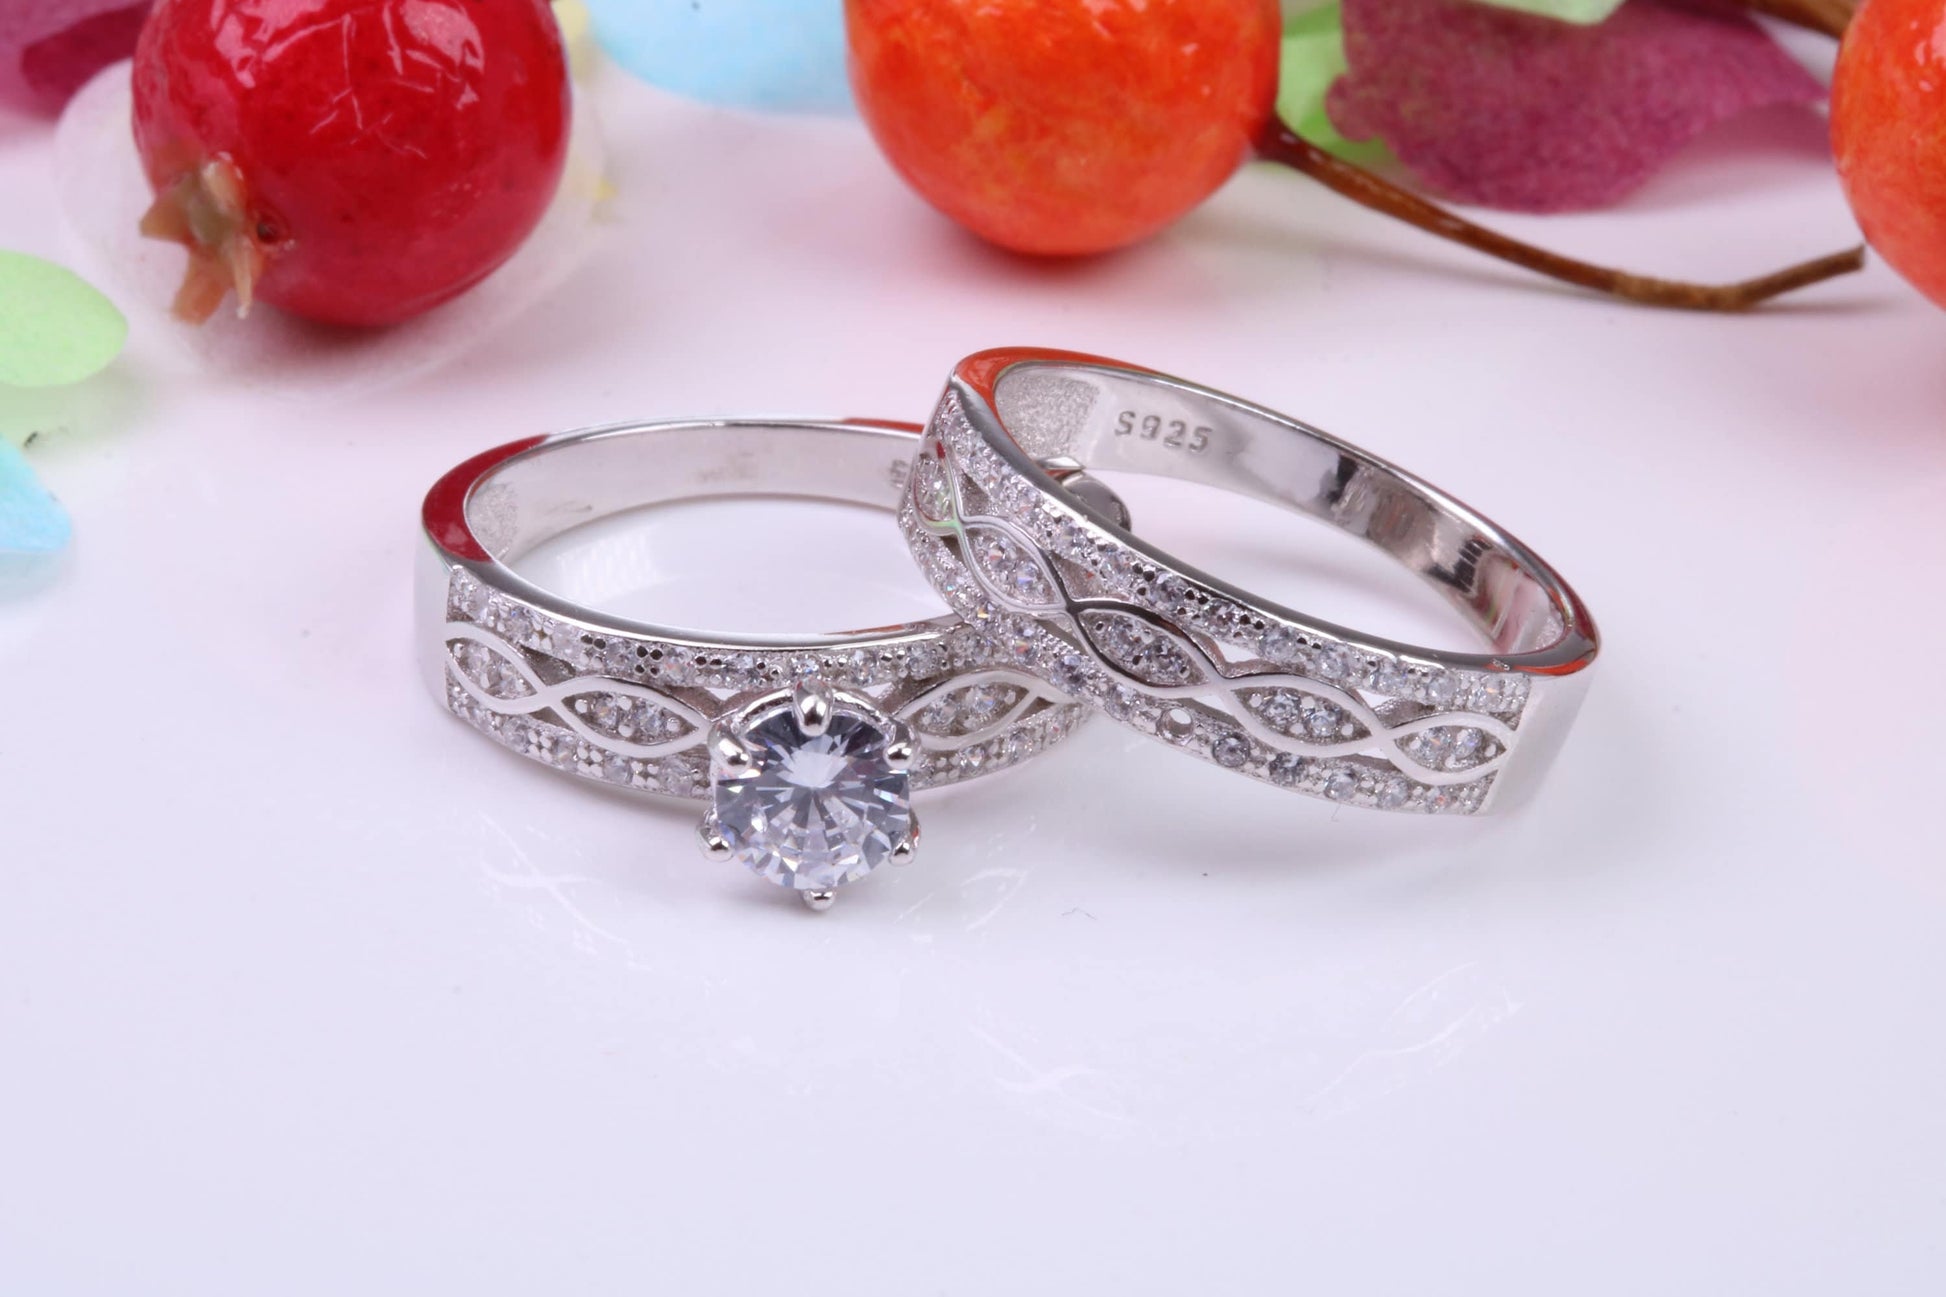 Matching Engagement and Wedding Ring, Cubic Zirconia set Rings, Made from solid Silver